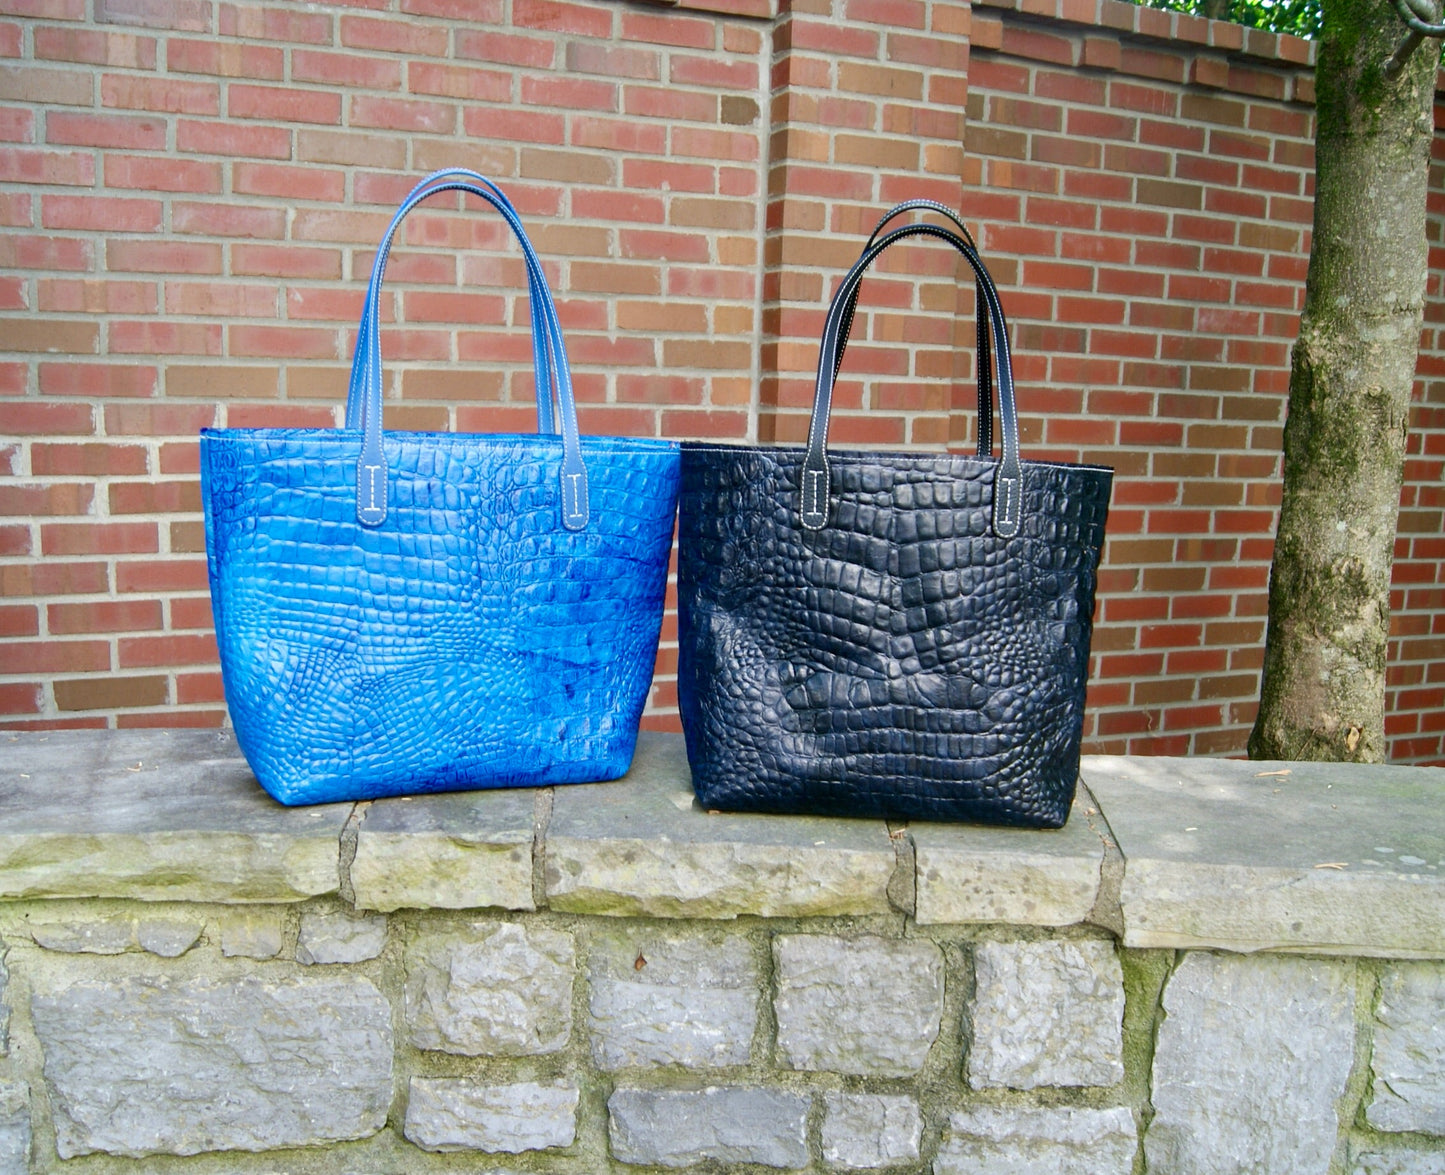 Mary Style Tote in Black